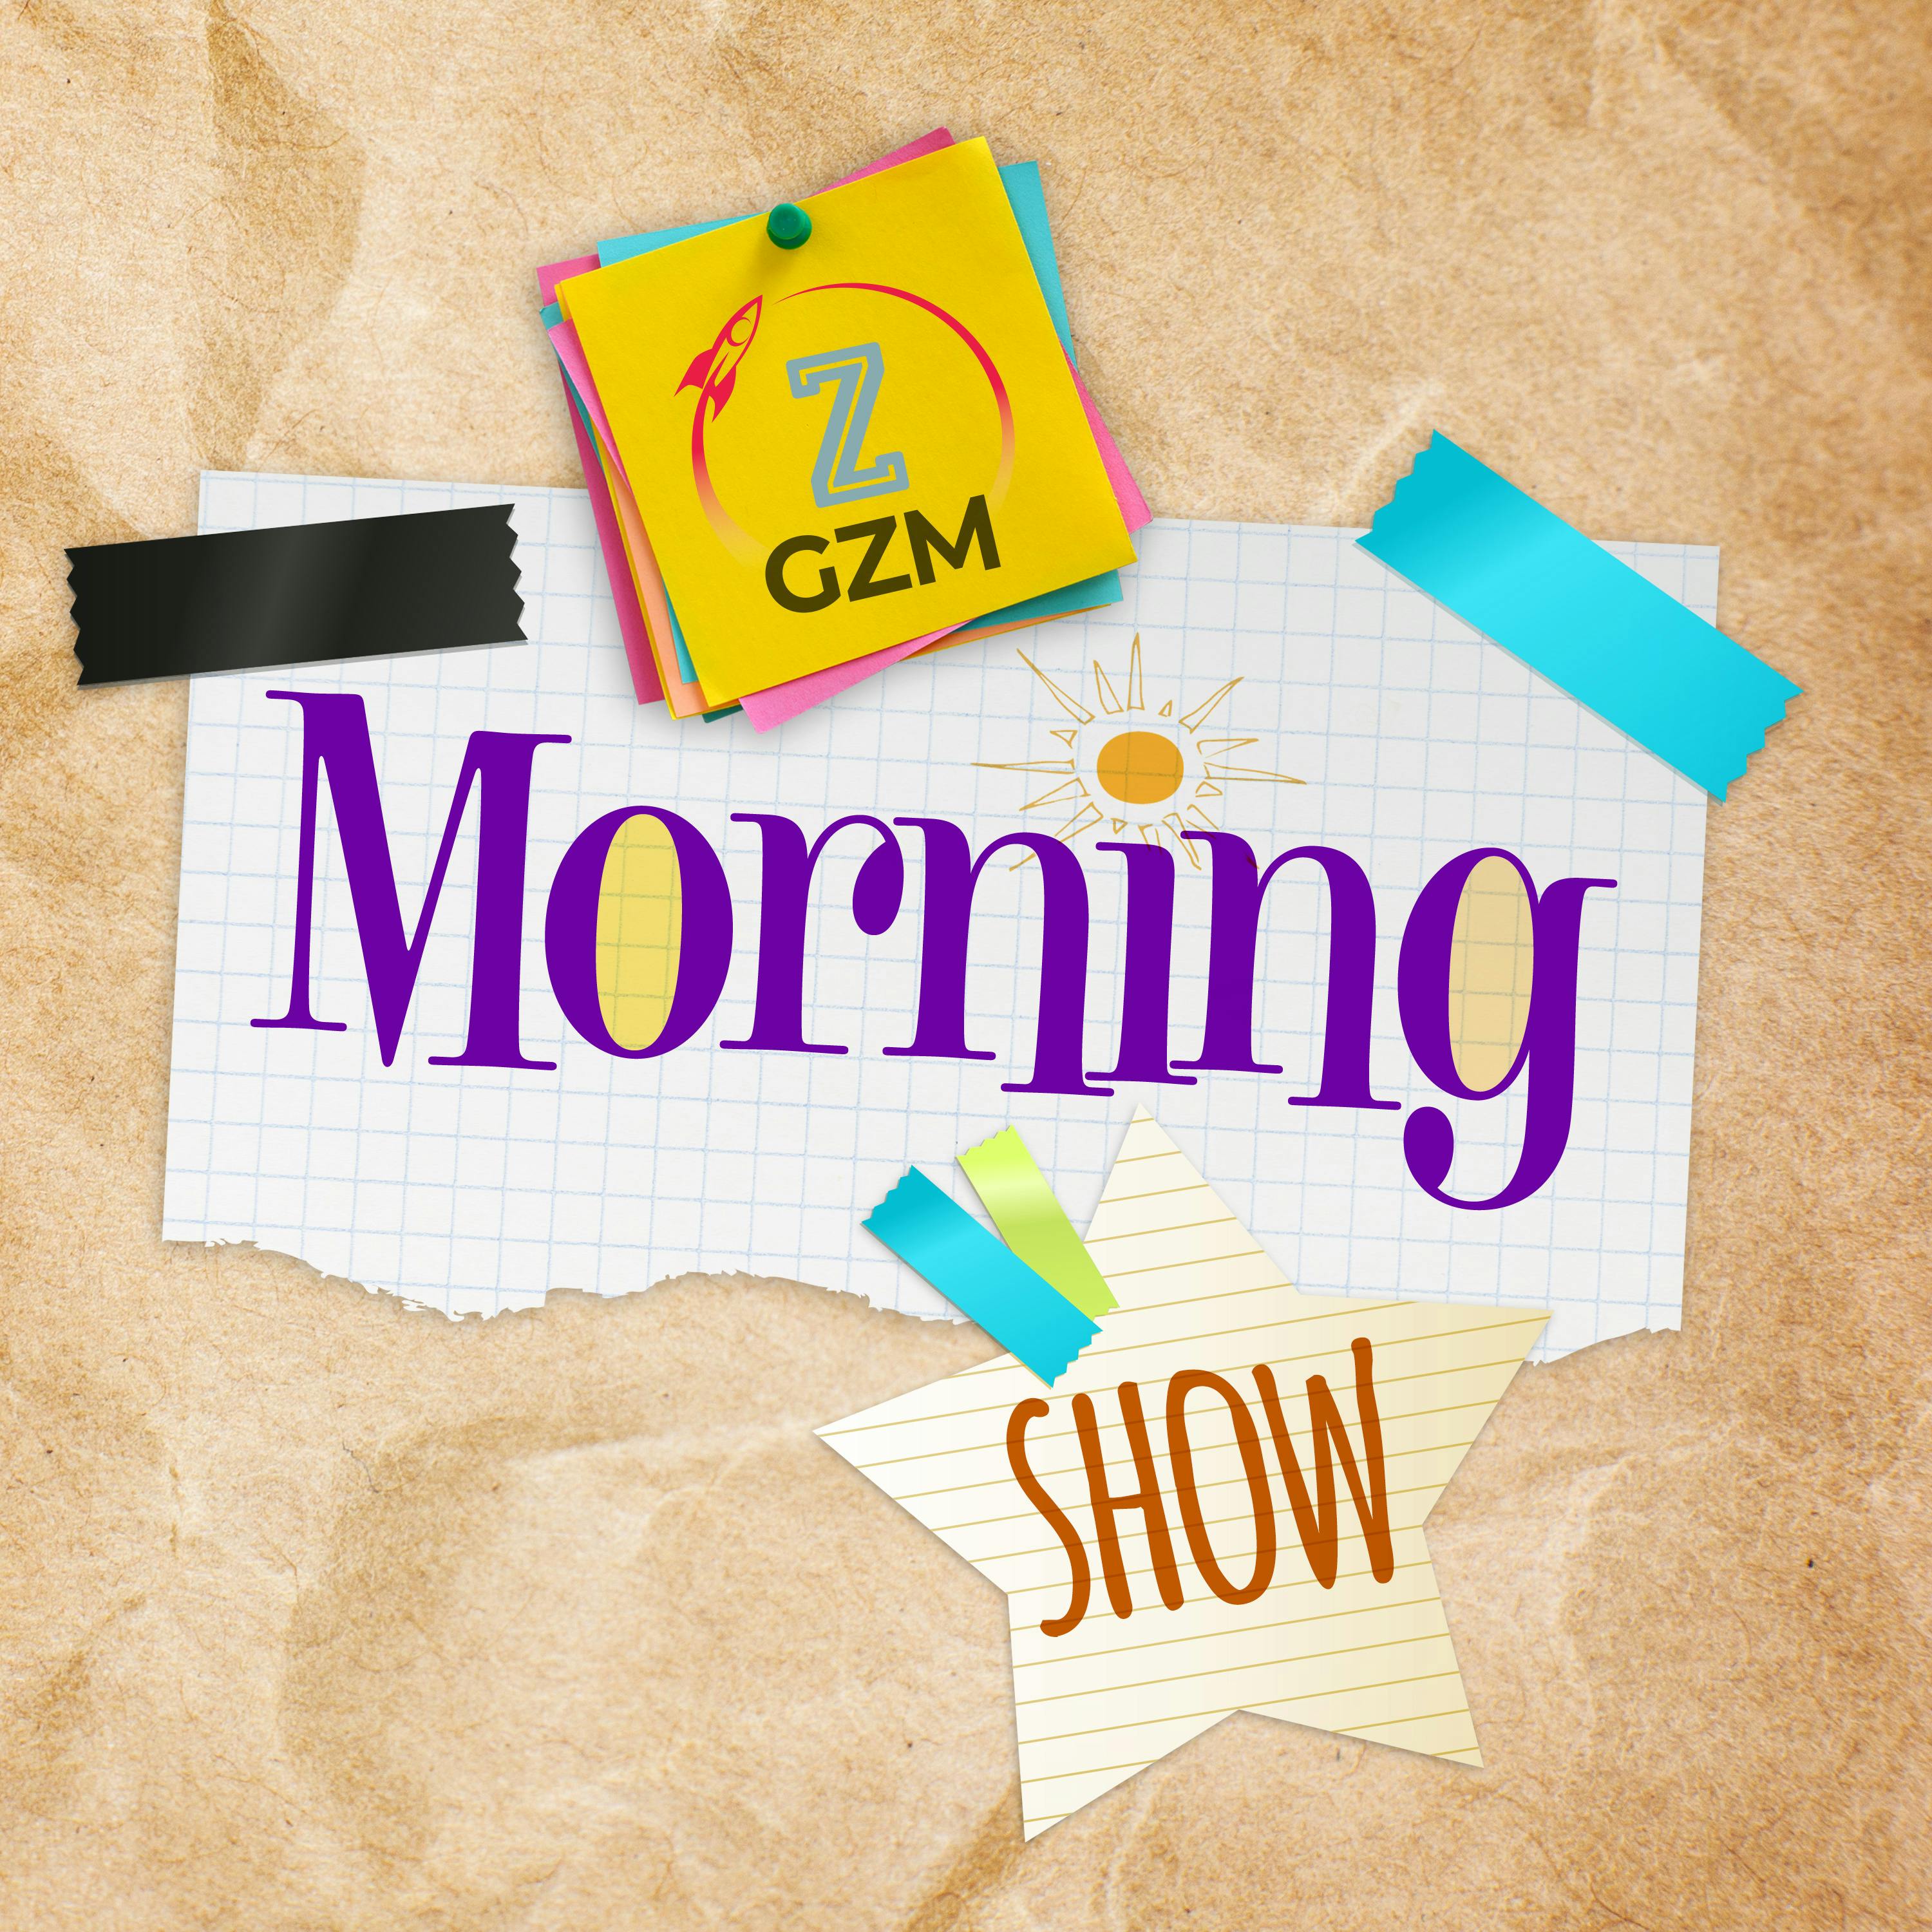 Introducing – GZM Morning Show